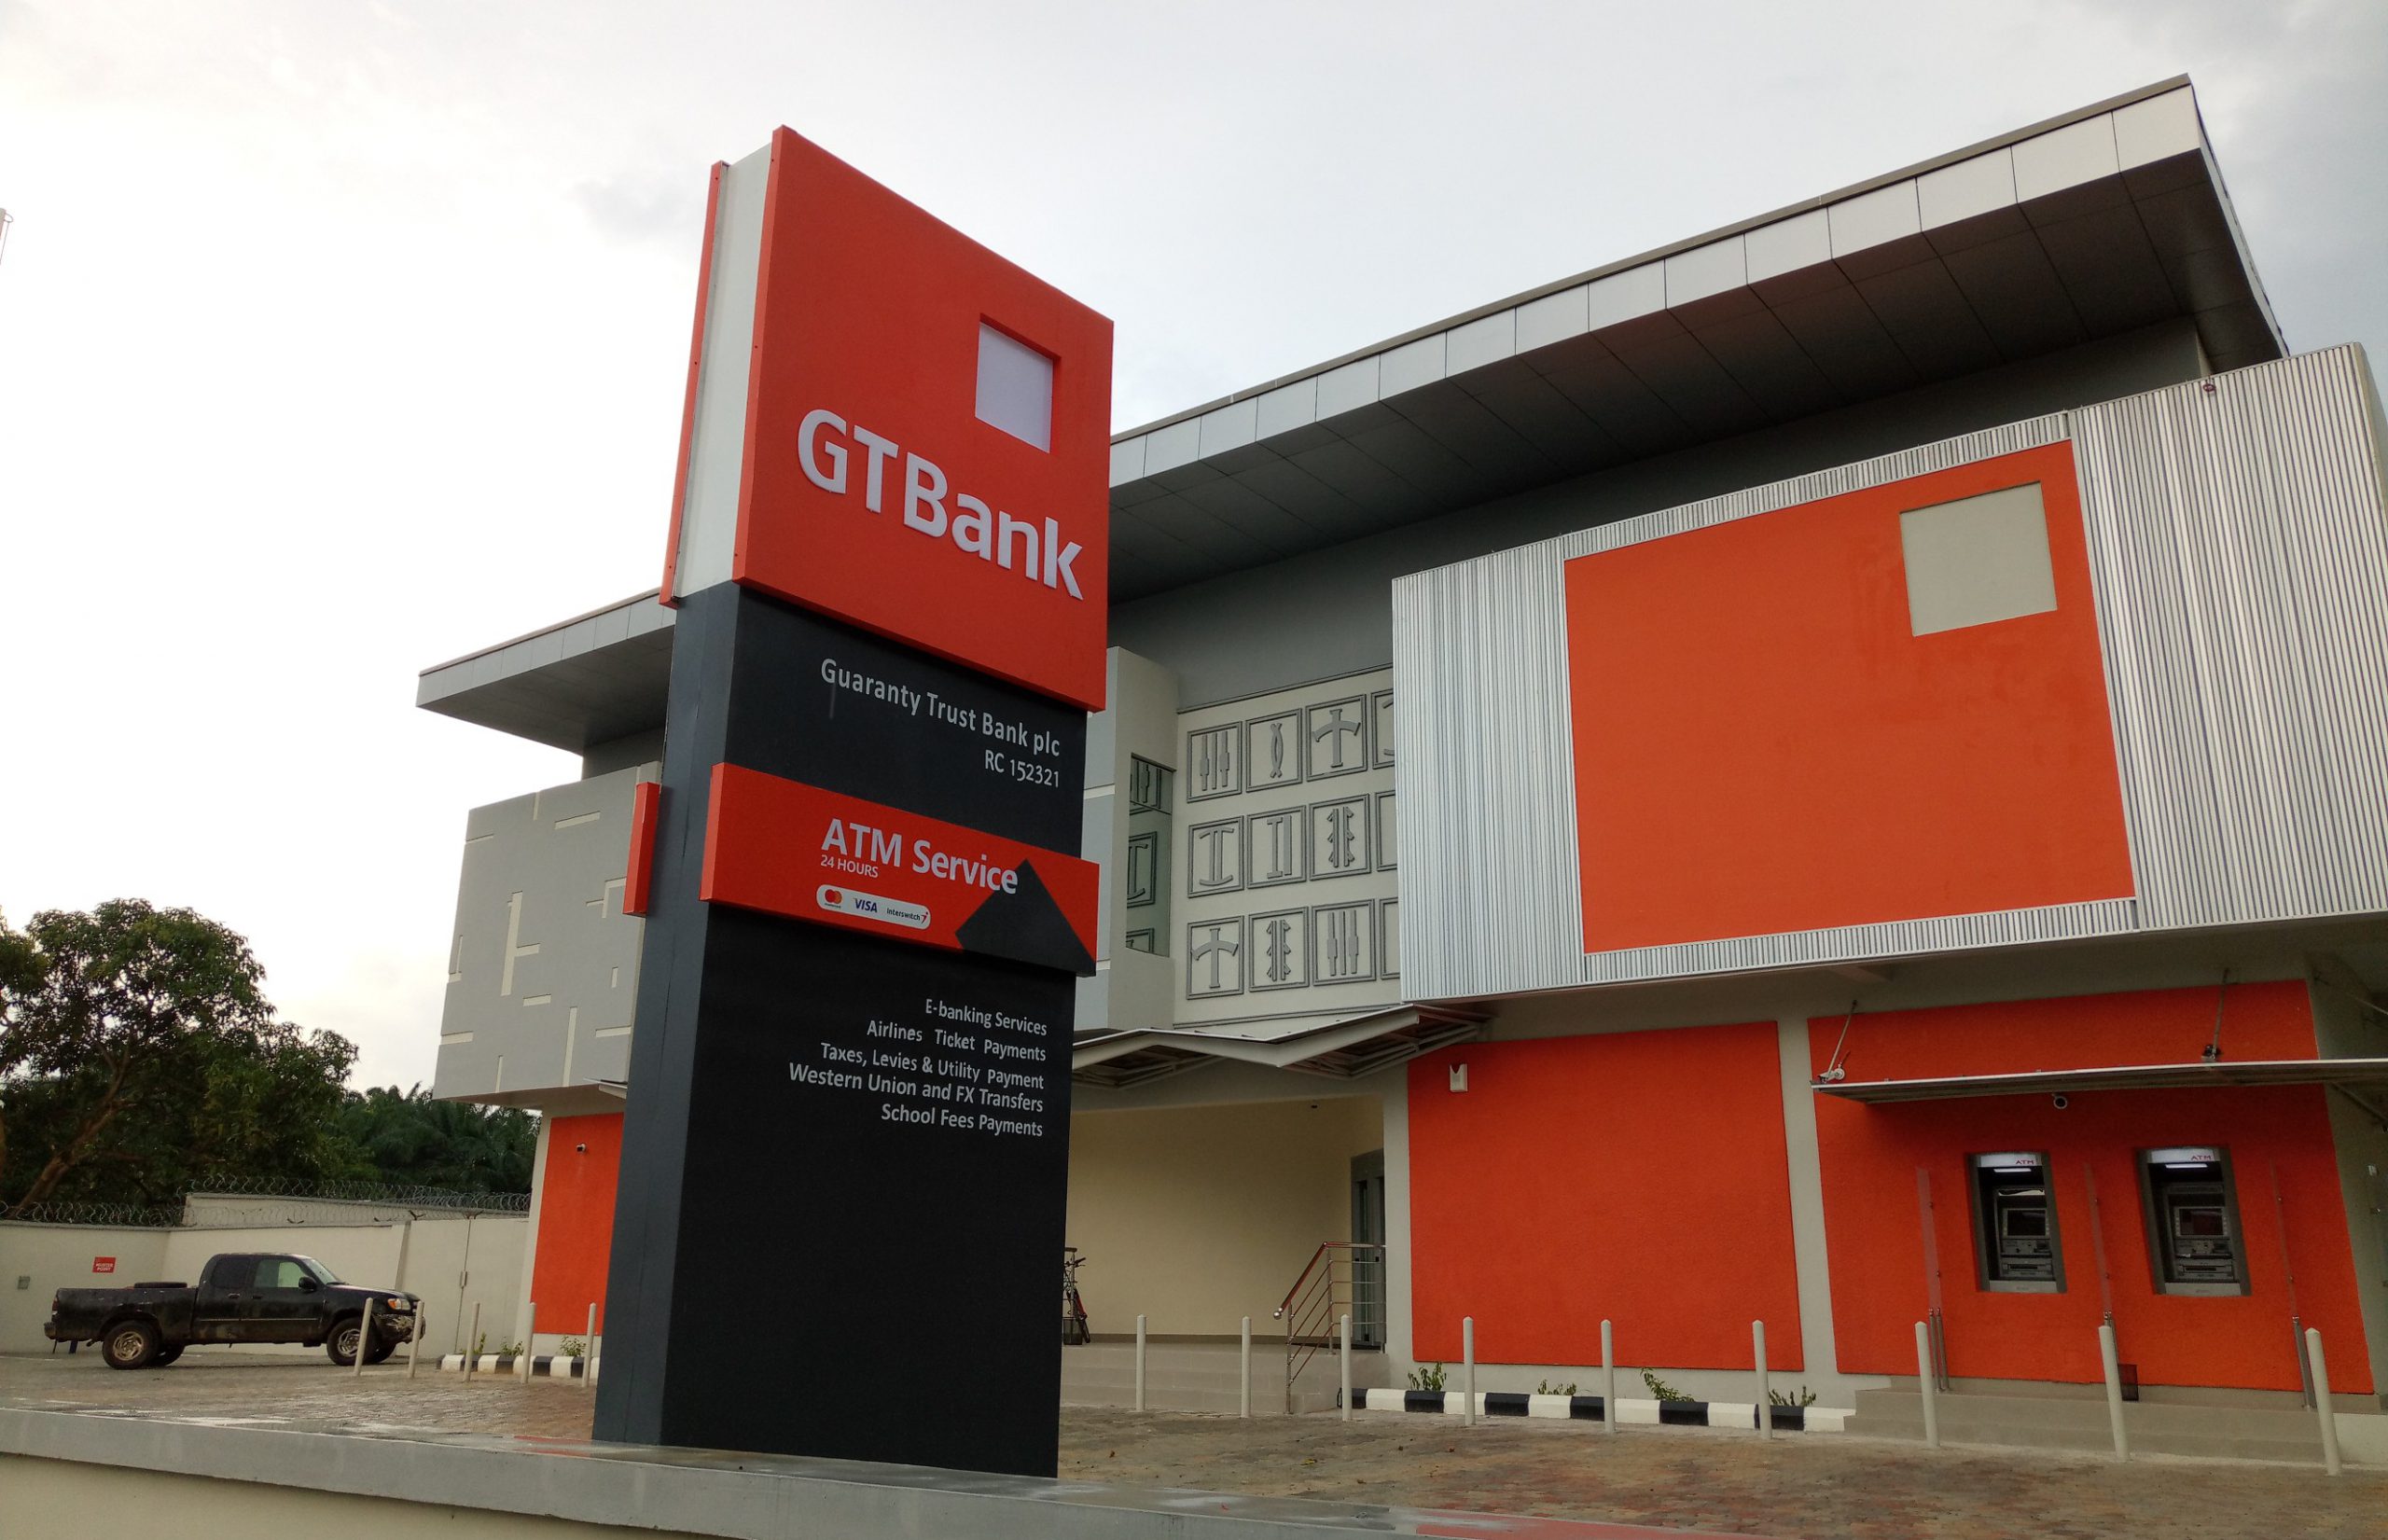 GTBank Maintains Dominance In Financial Services, Wins Four Awards At Brand Africa 100 Awards